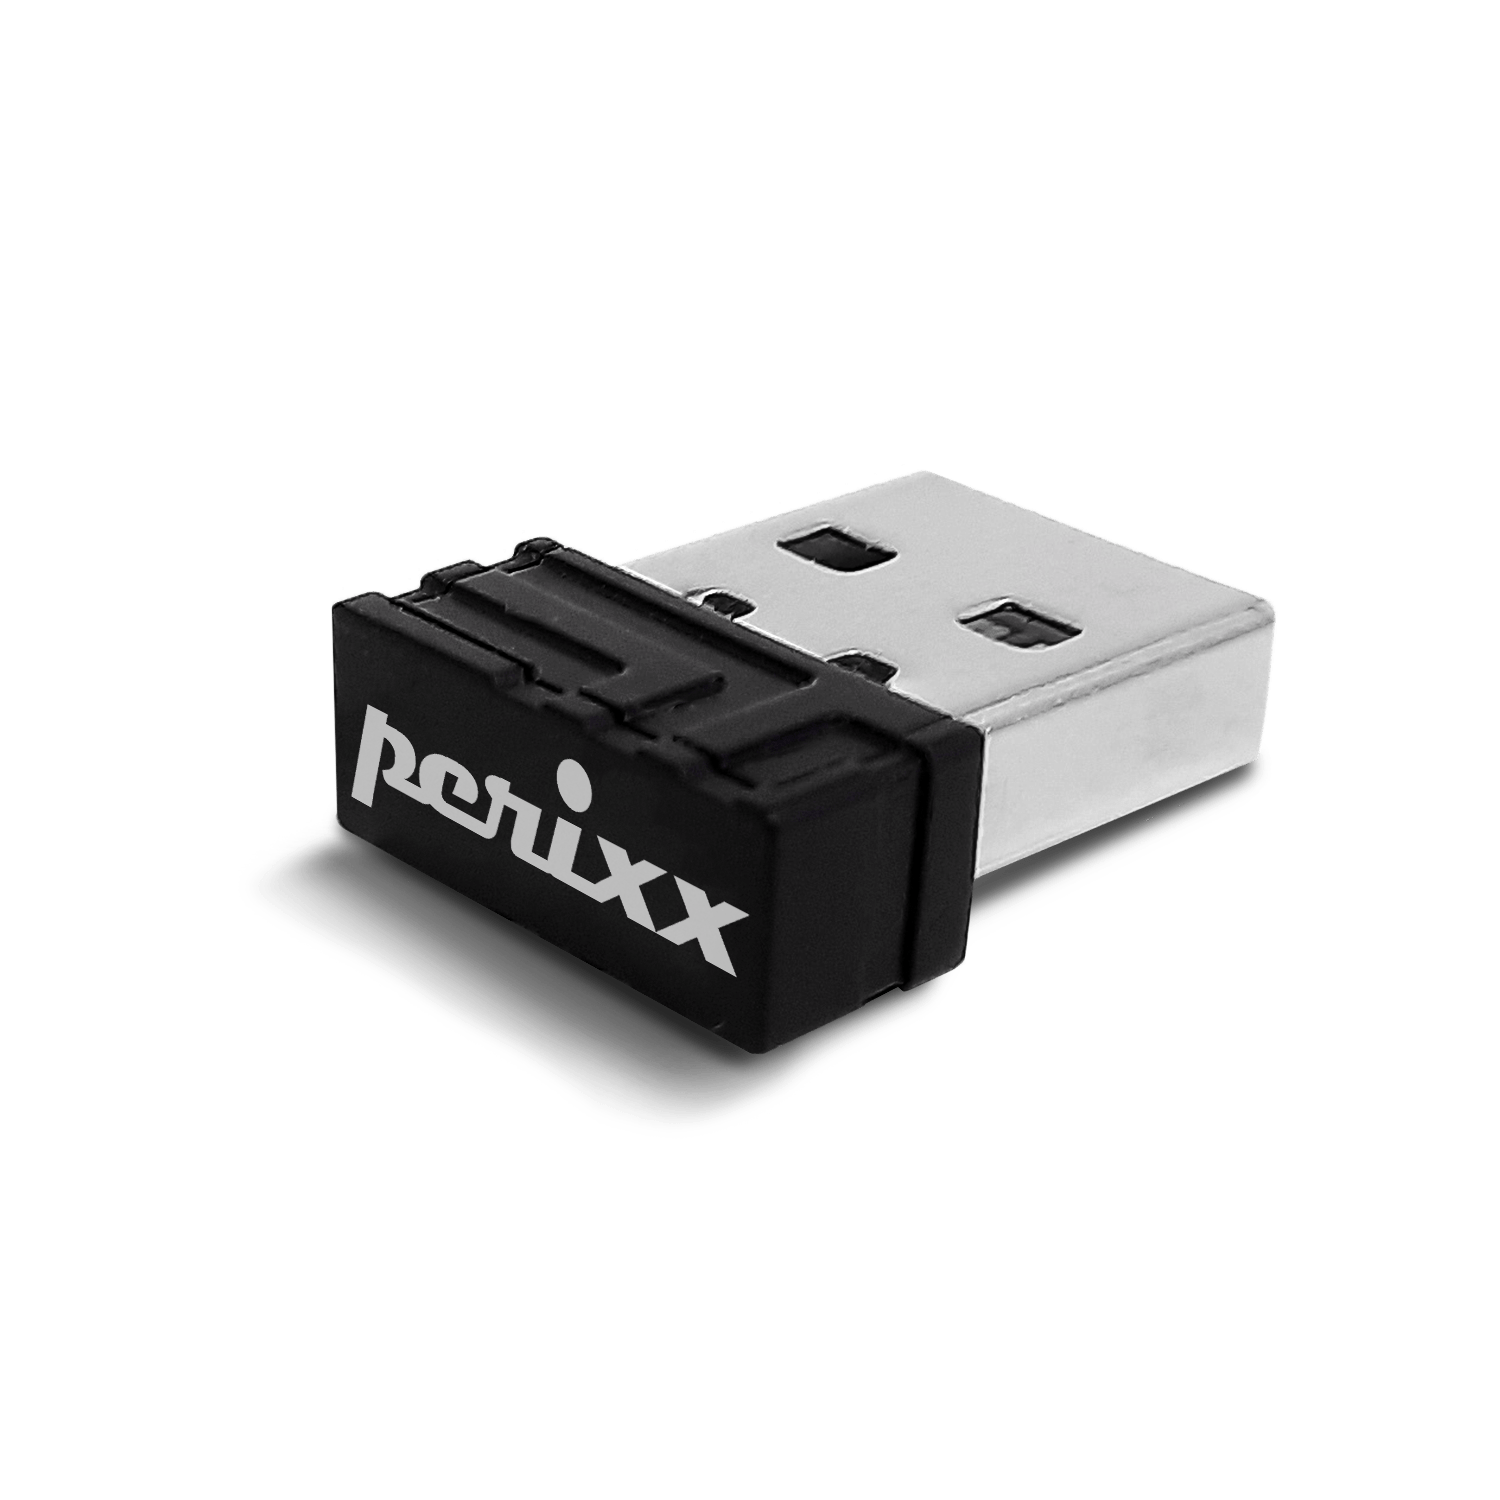 USB dongle receiver for PERIDUO-605 - Perixx Europe